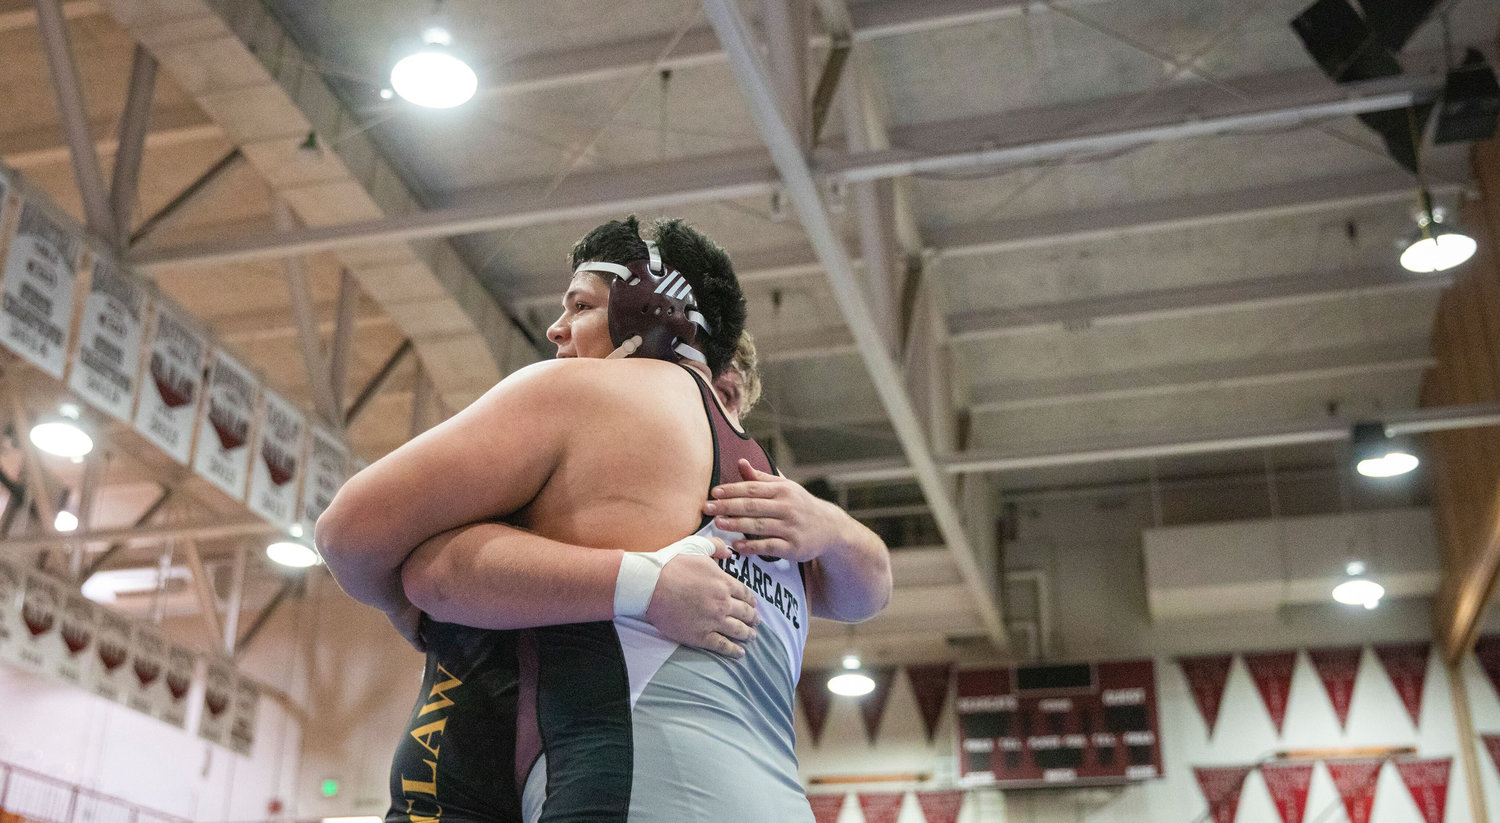 W.F. West senior Daniel Matagi embraces Zeke Luchi of Enumclaw after wrestling at 285 pounds during the Bearcat Invitational at his last home meet in Chehalis Saturday night.